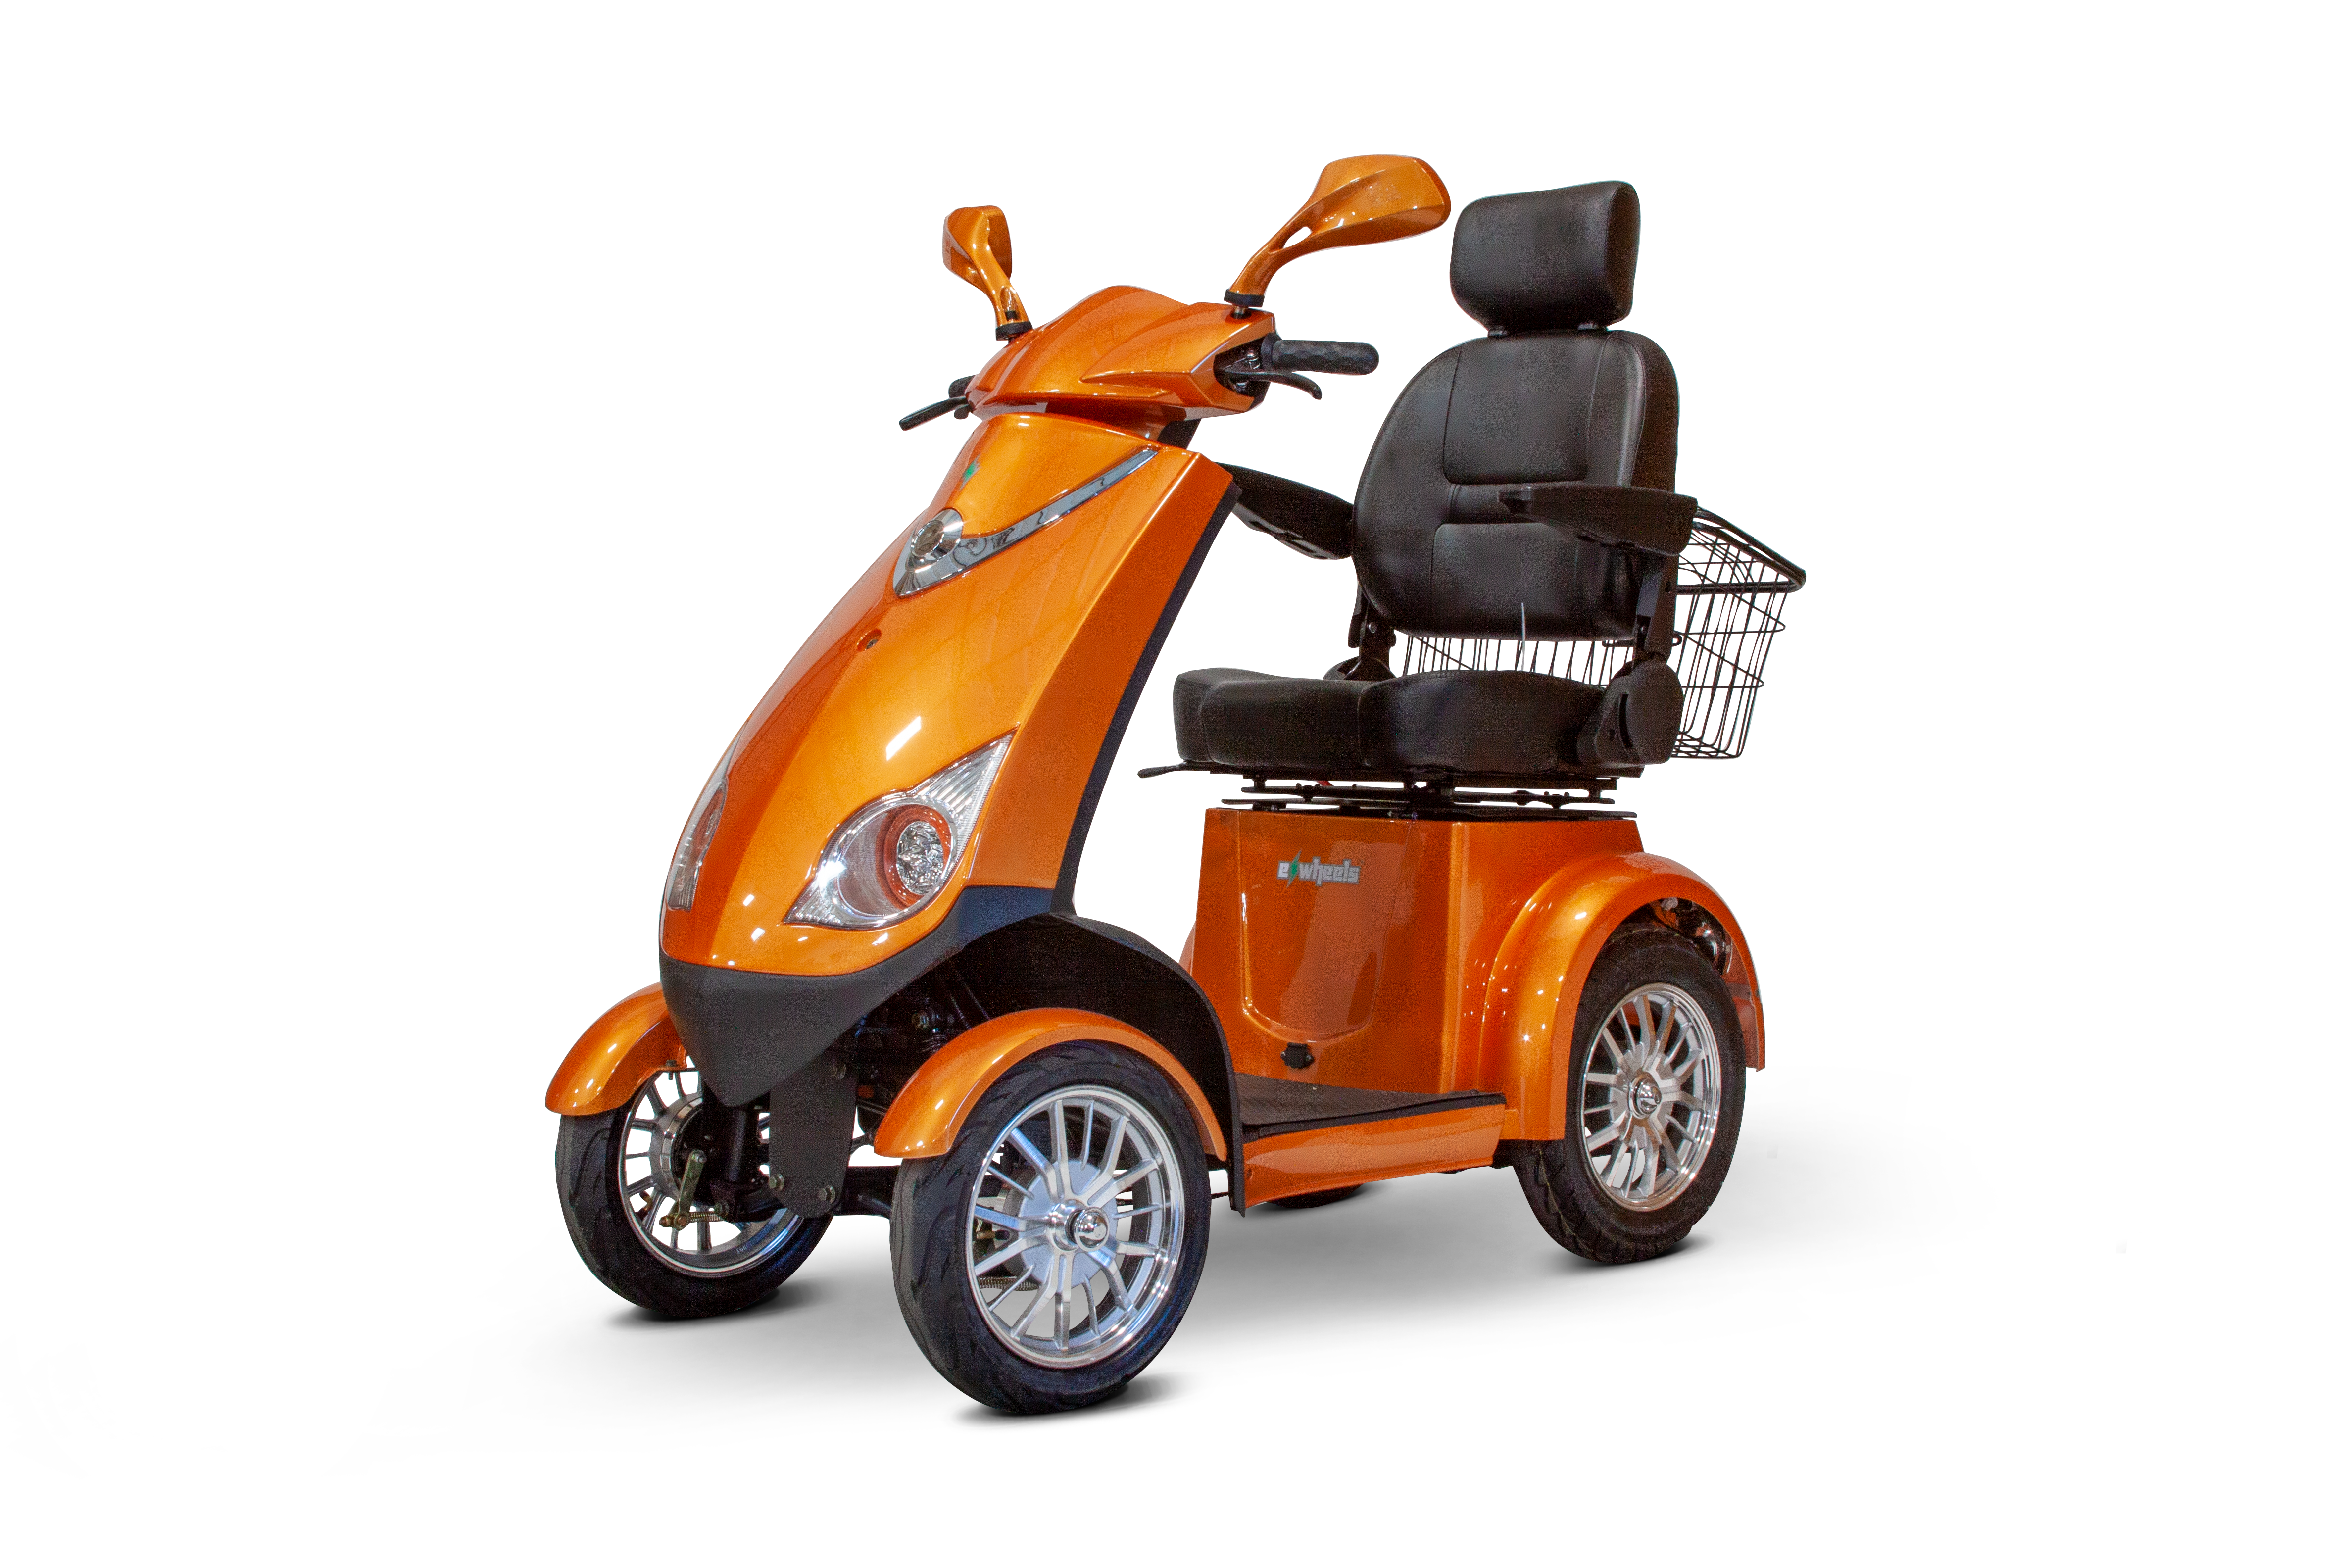 ew-72 electric scooter color orange- four wheeled type- with a captain deluxe seat 